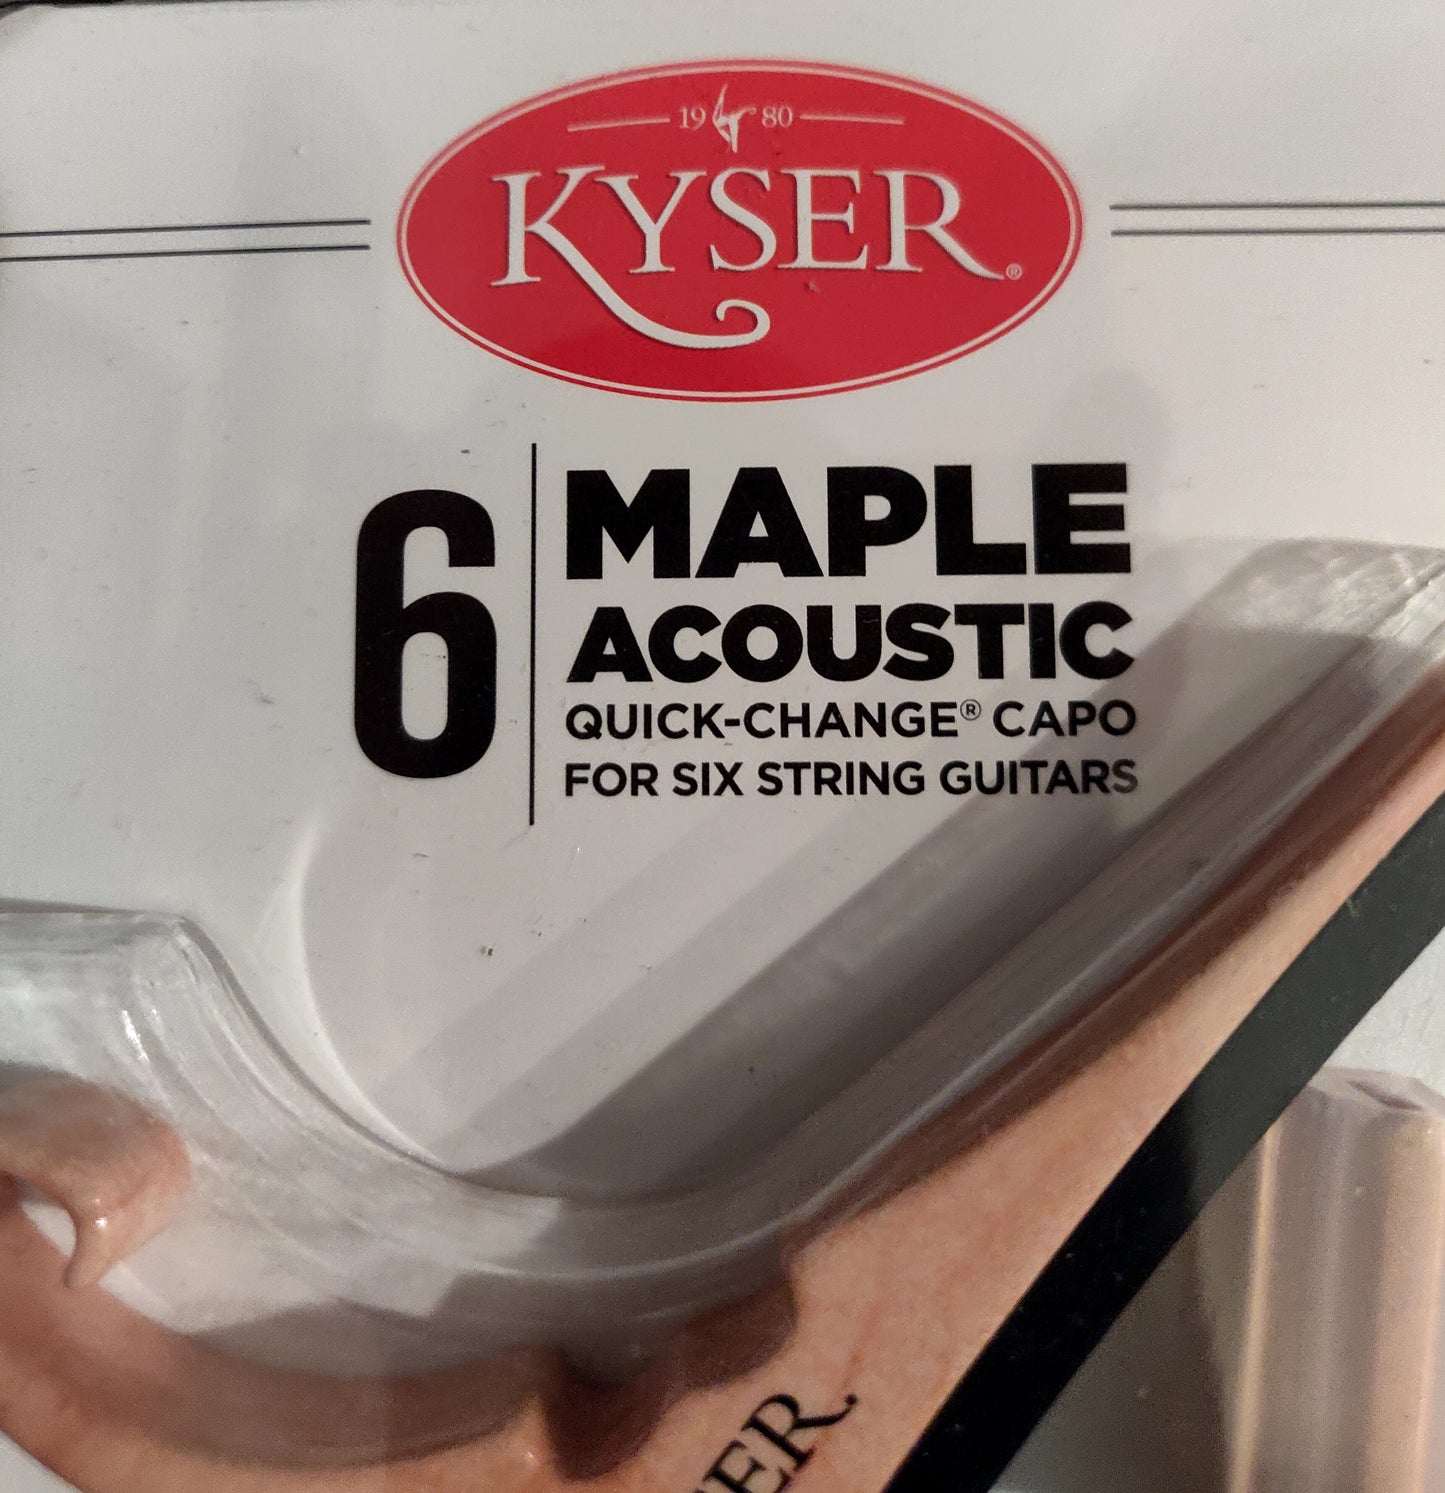 Kyser® Quick-Change Capo for Acoustic/Electric Guitars - Maple